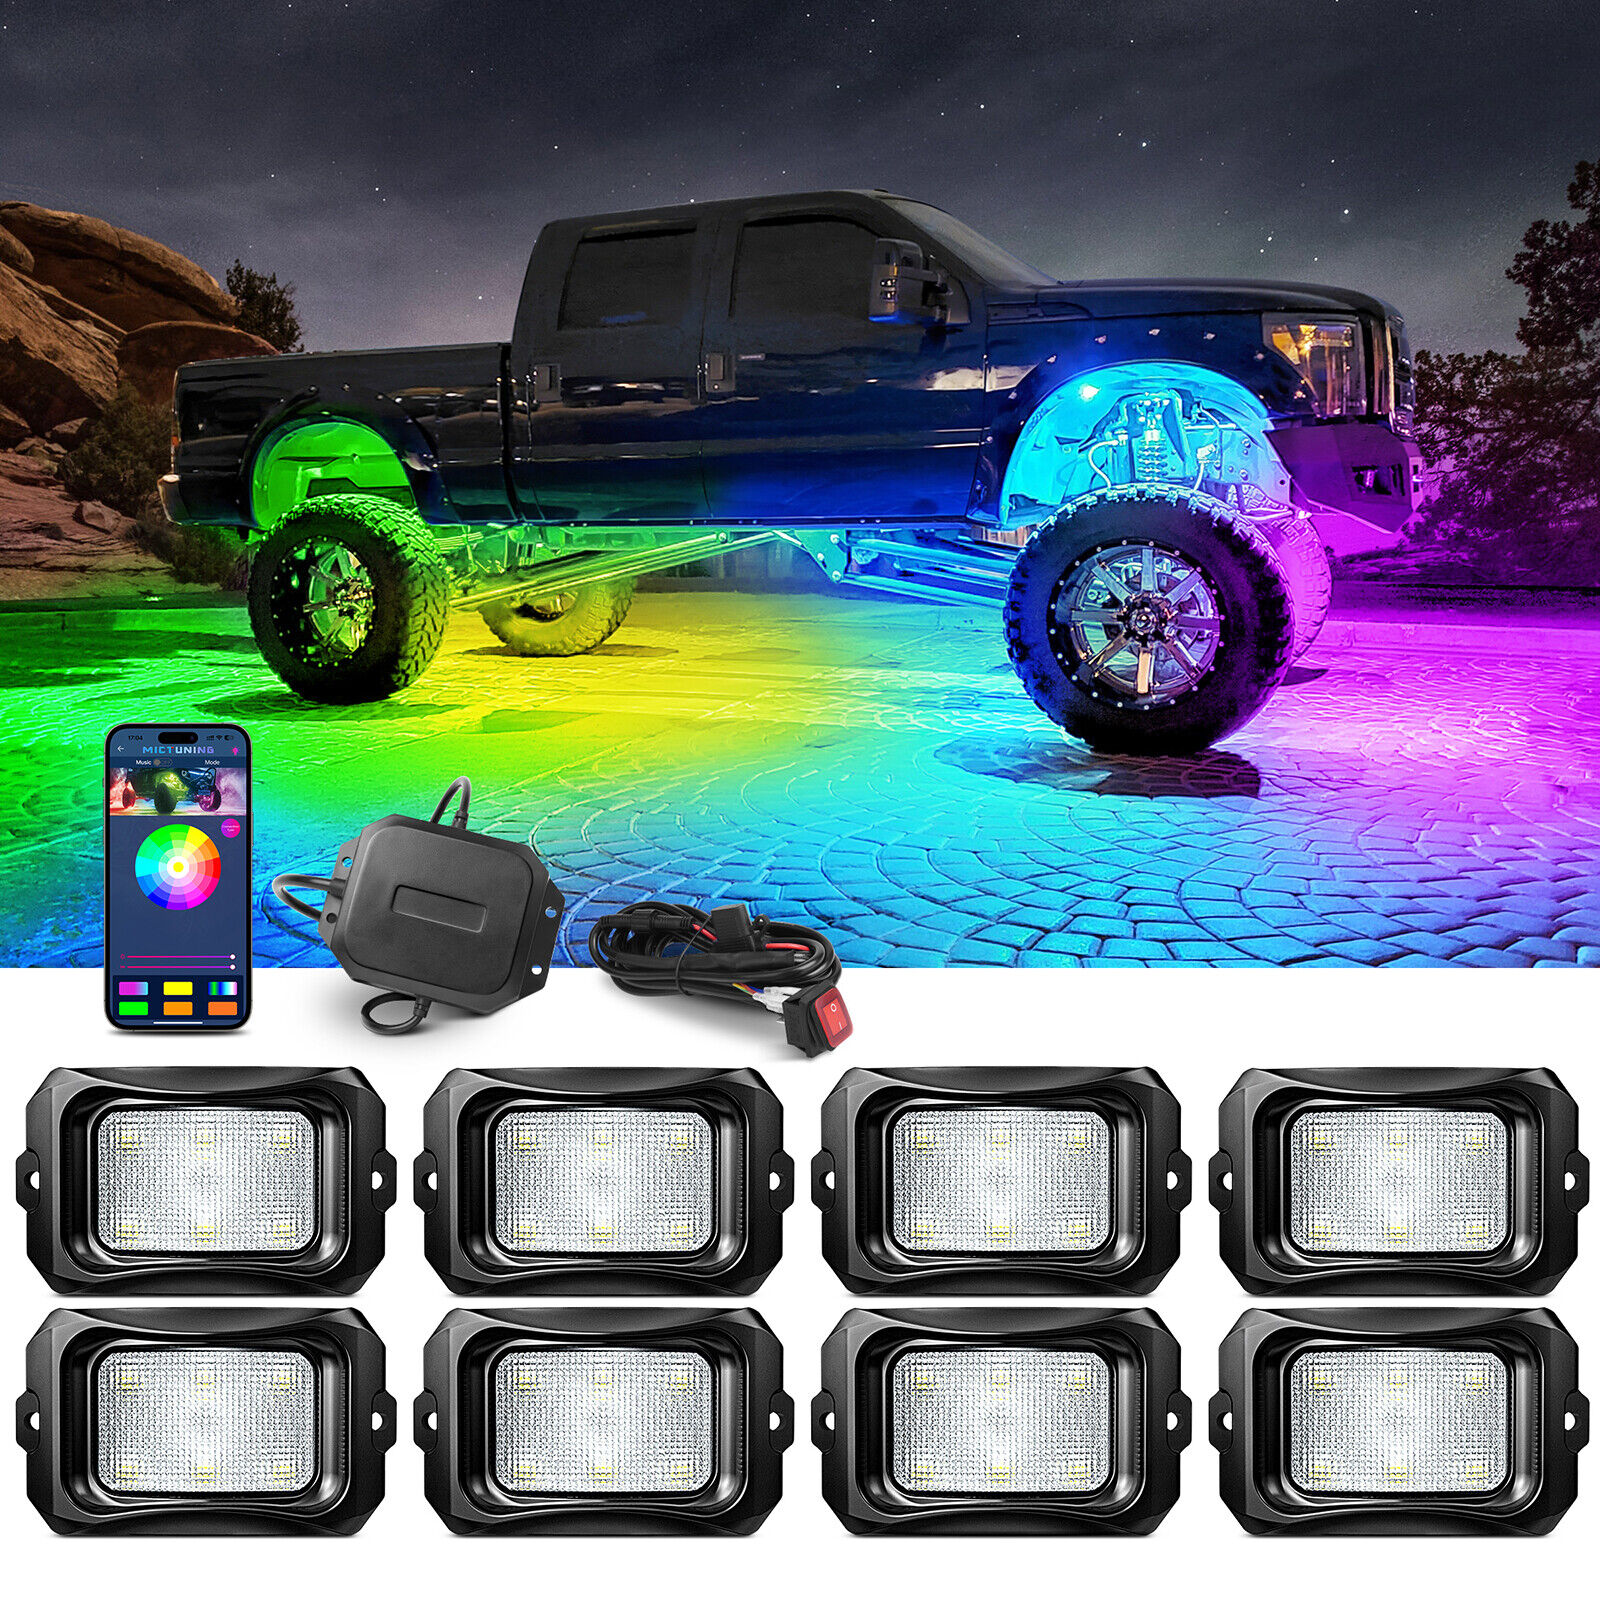 MICTUNING C2 RGB+IC LED Rock Lights Kit 8Pods Offroad Truck Underbody Neon Music